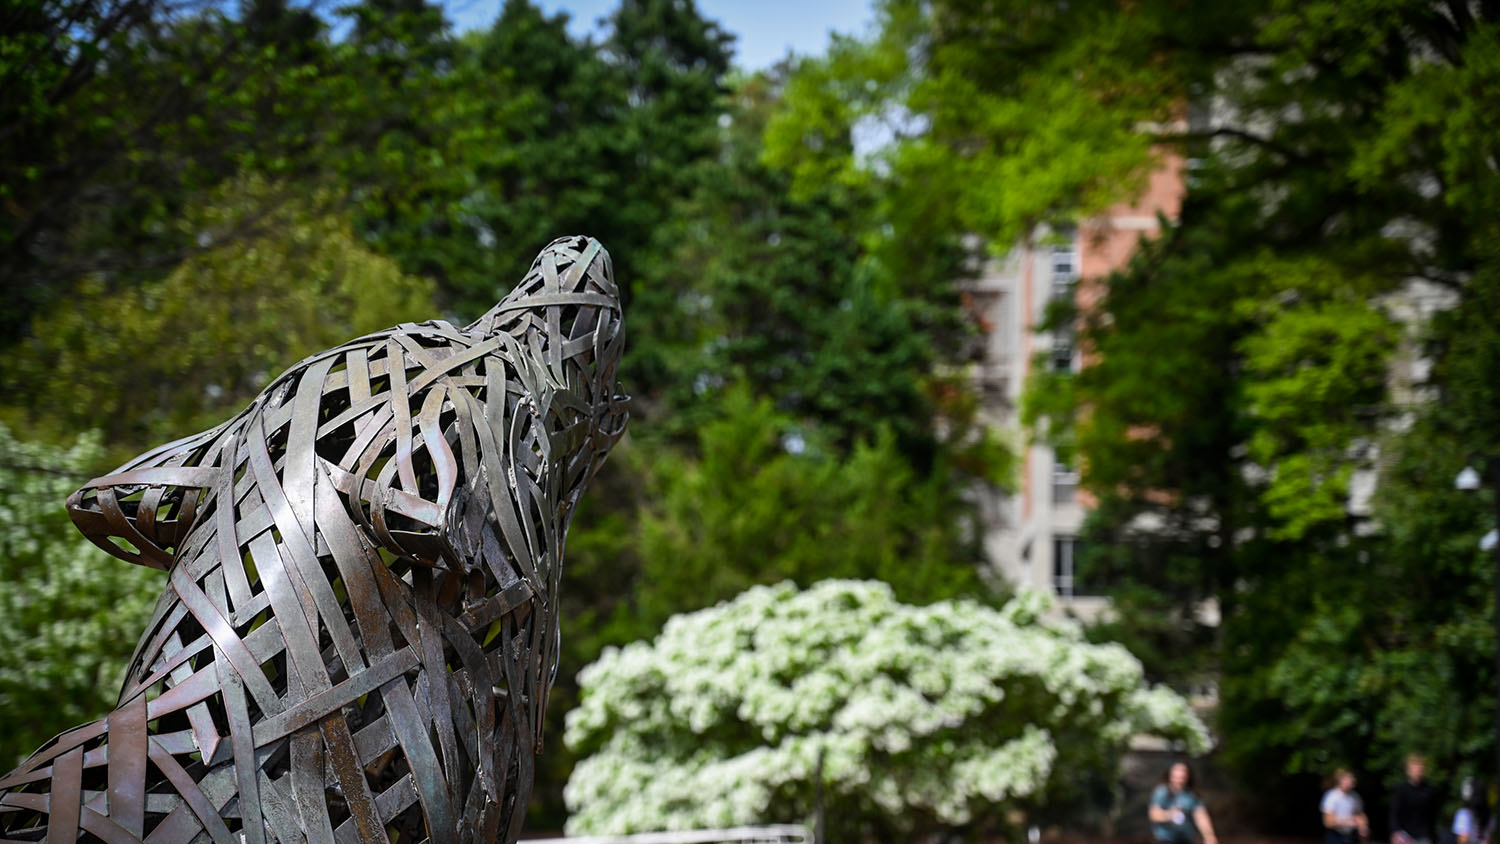 One of the copper wolves at Wolf Plaza looks out over students passing by during spring time. Photo by Marc Hall